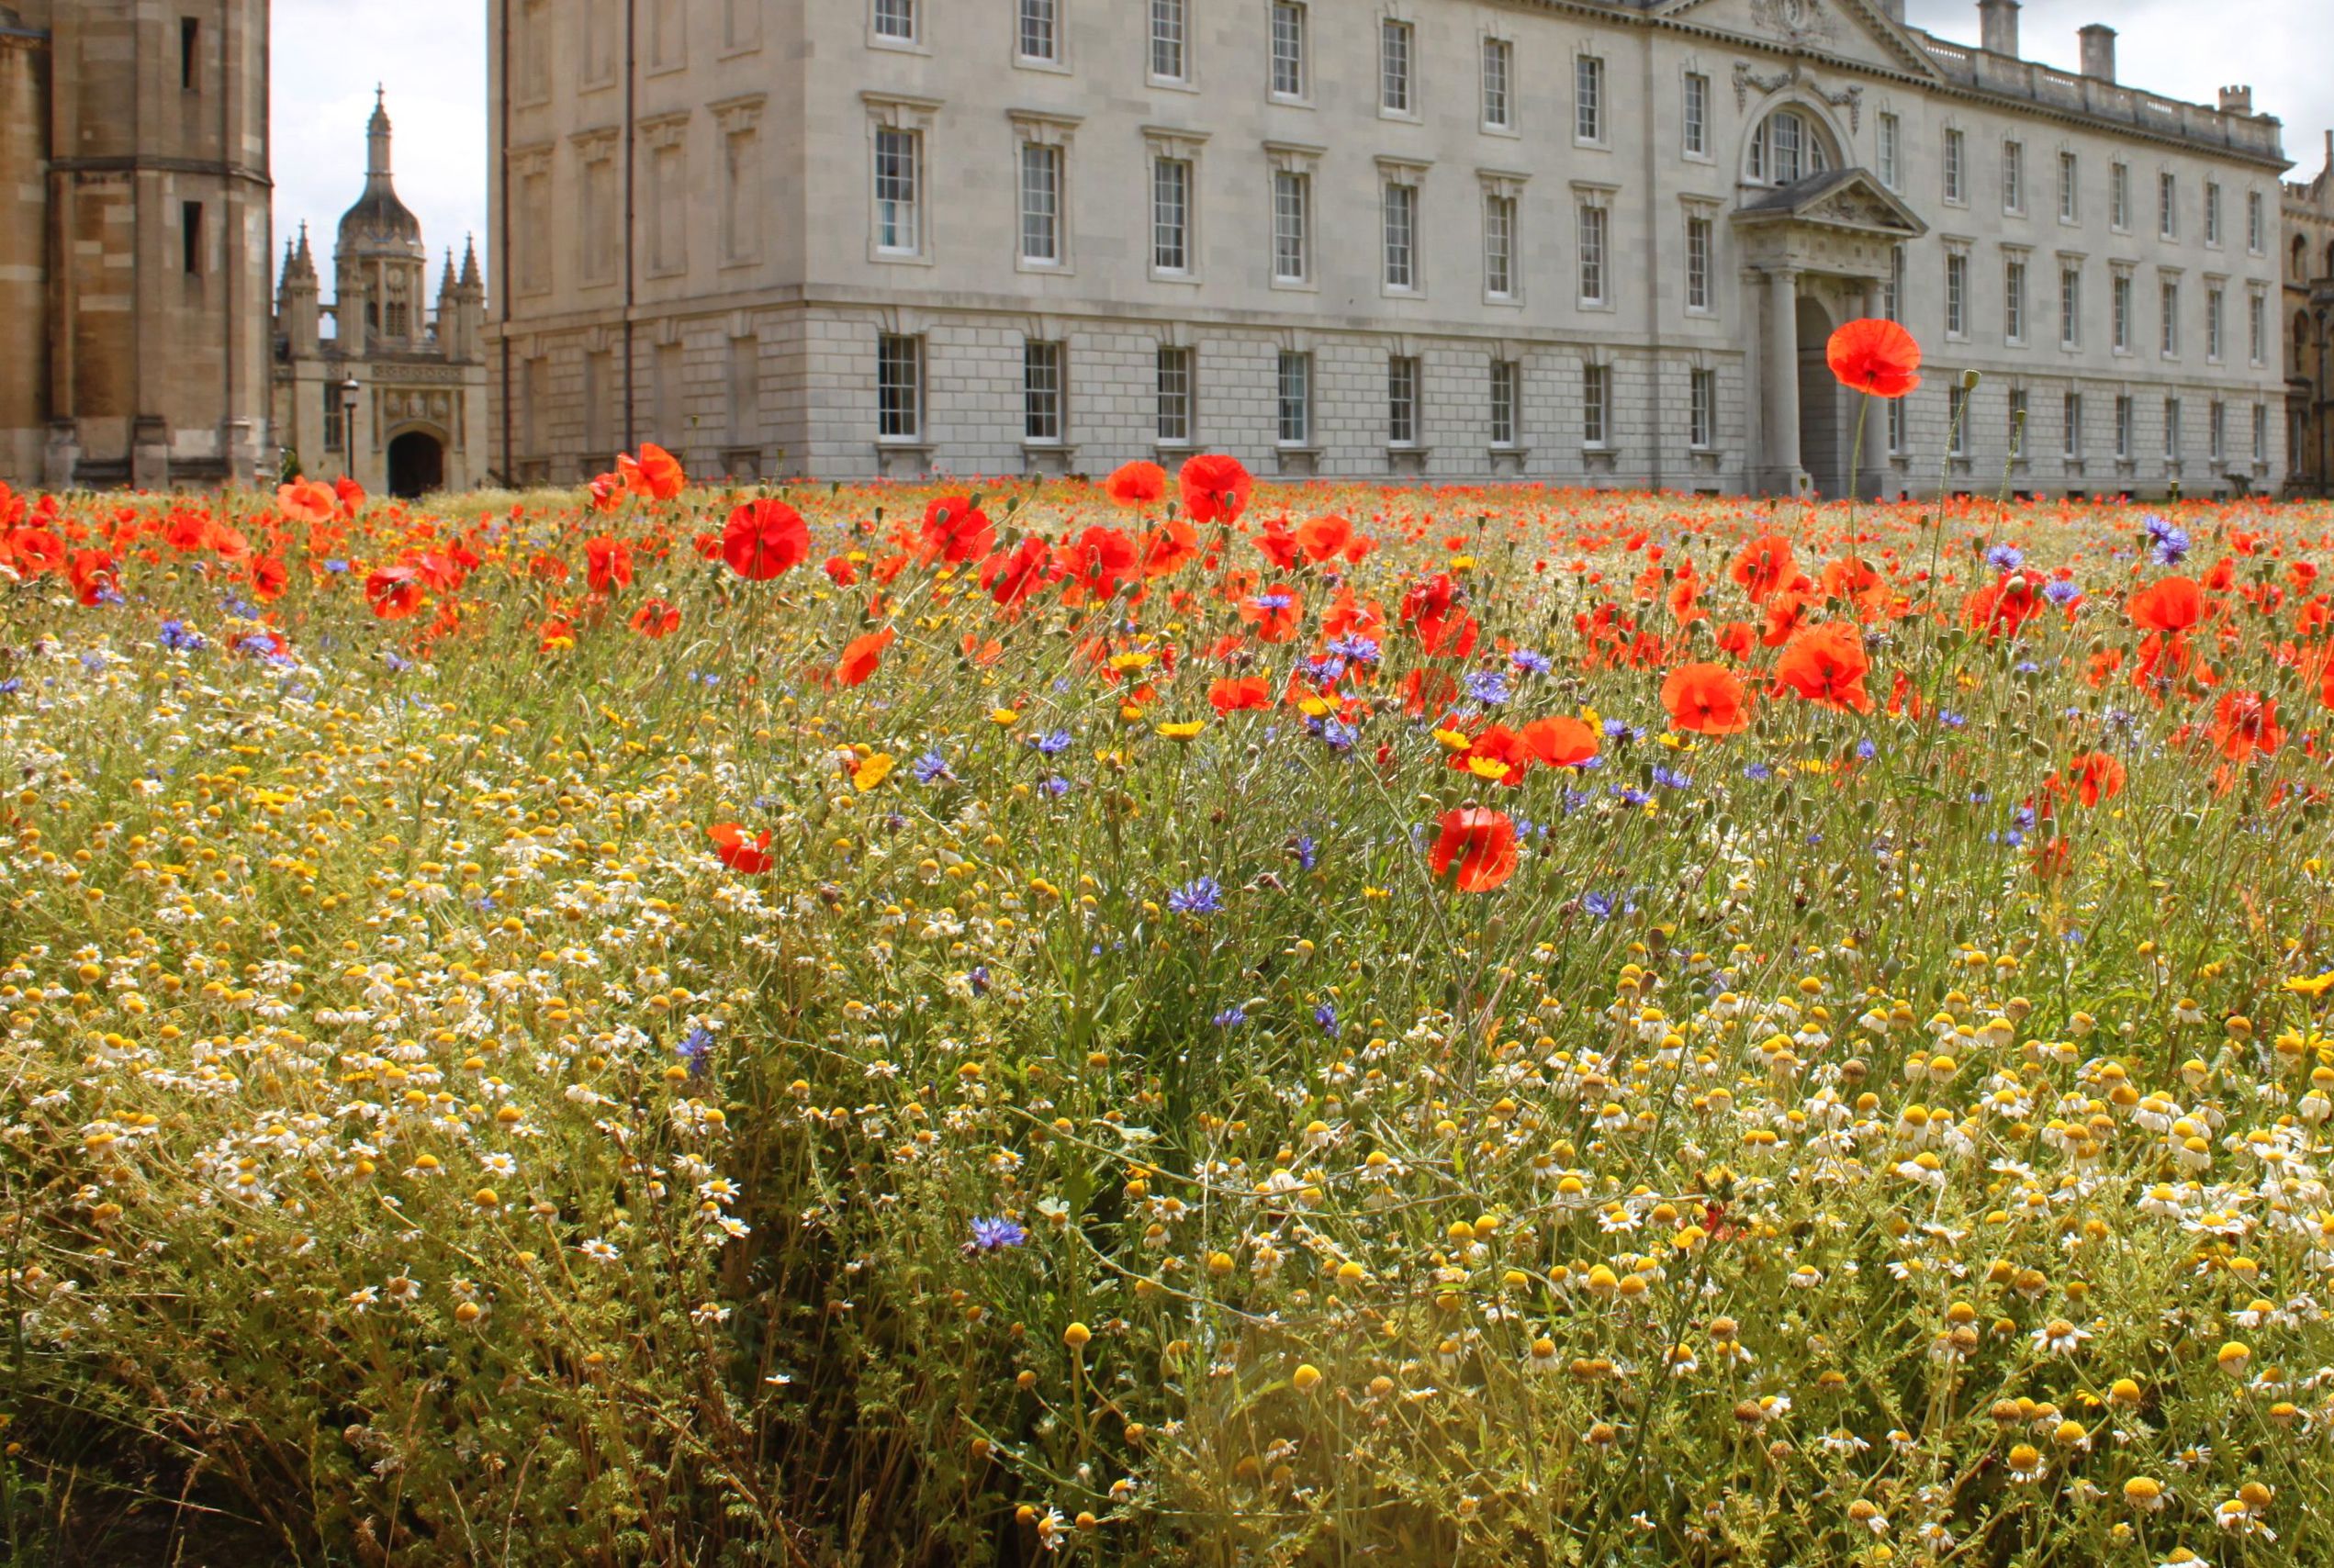 Poppy-filled meadow at King's College, Cambridge